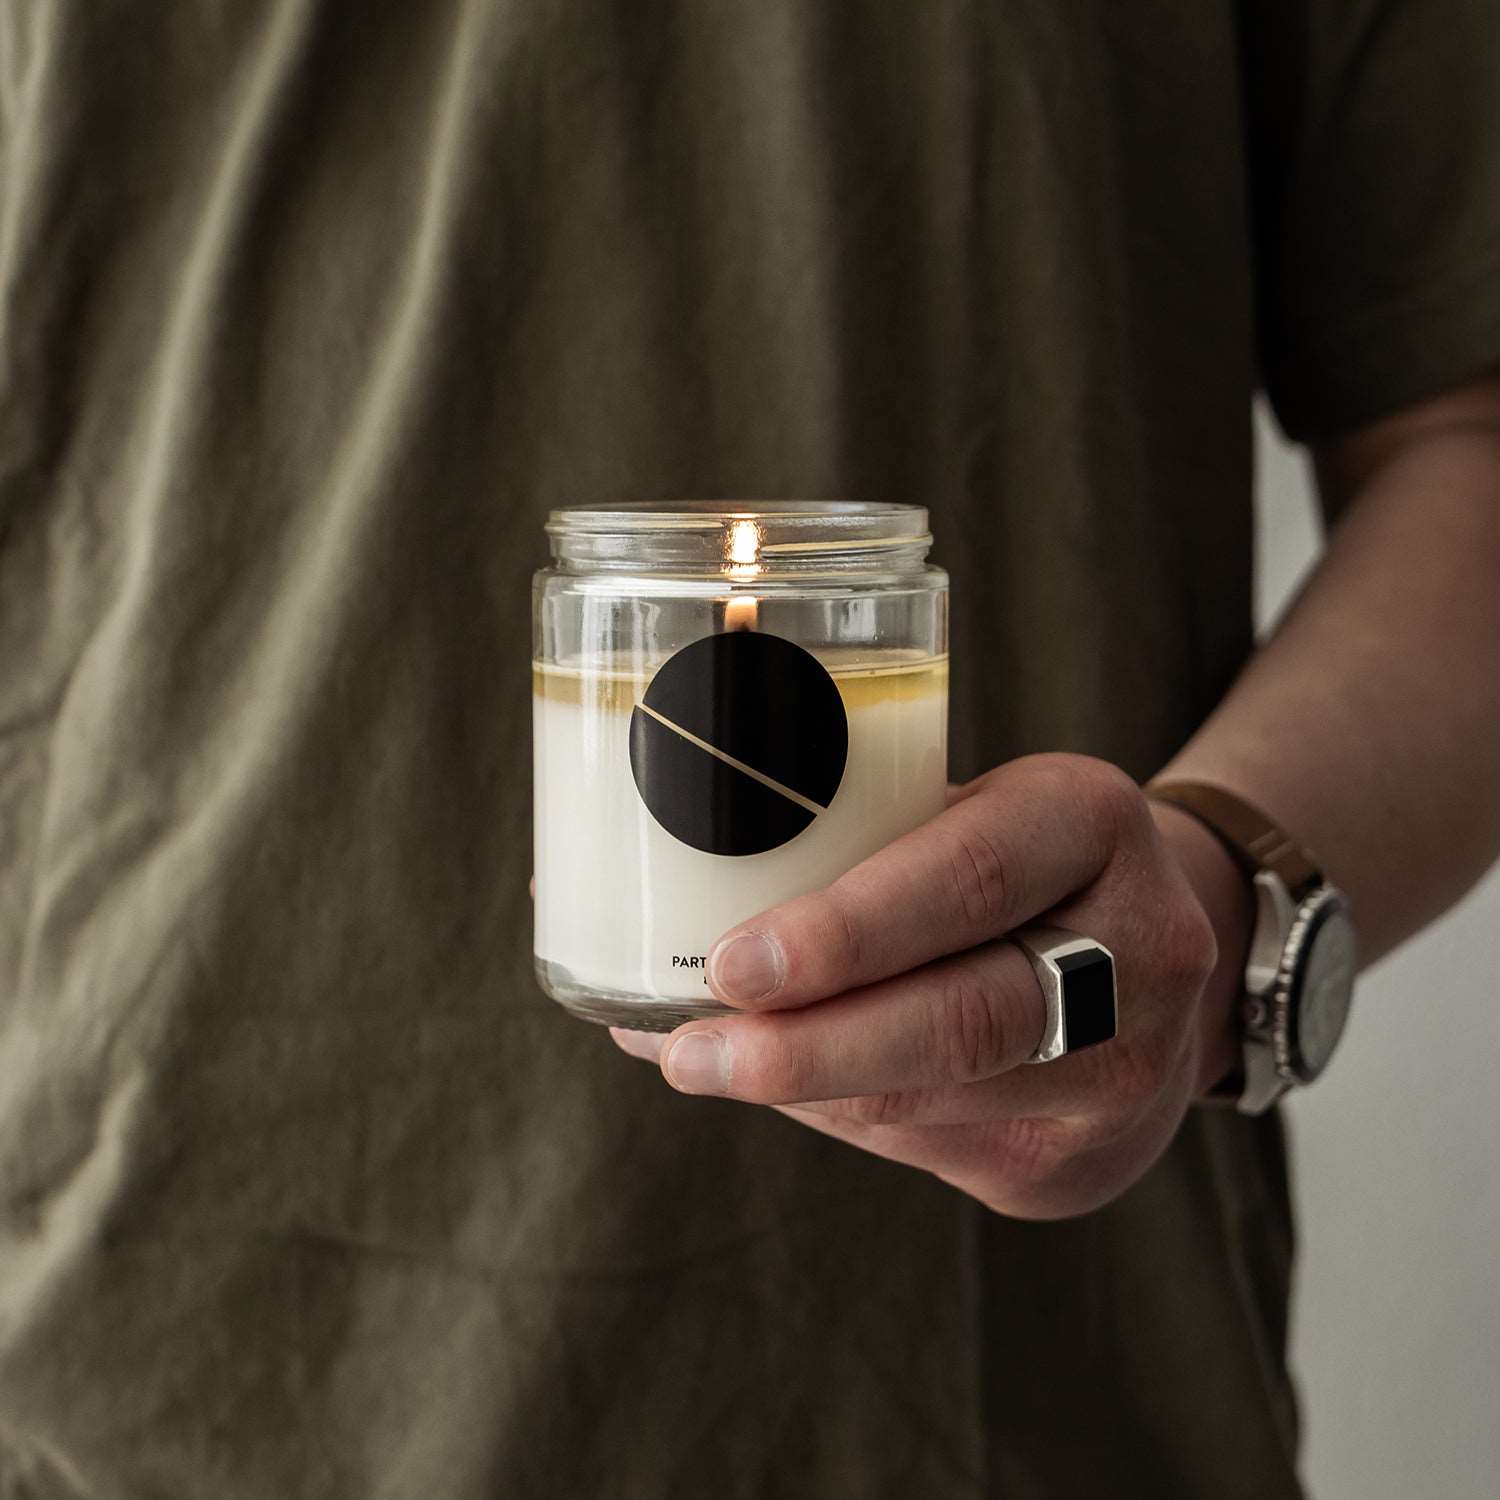 Forest Jar Candle